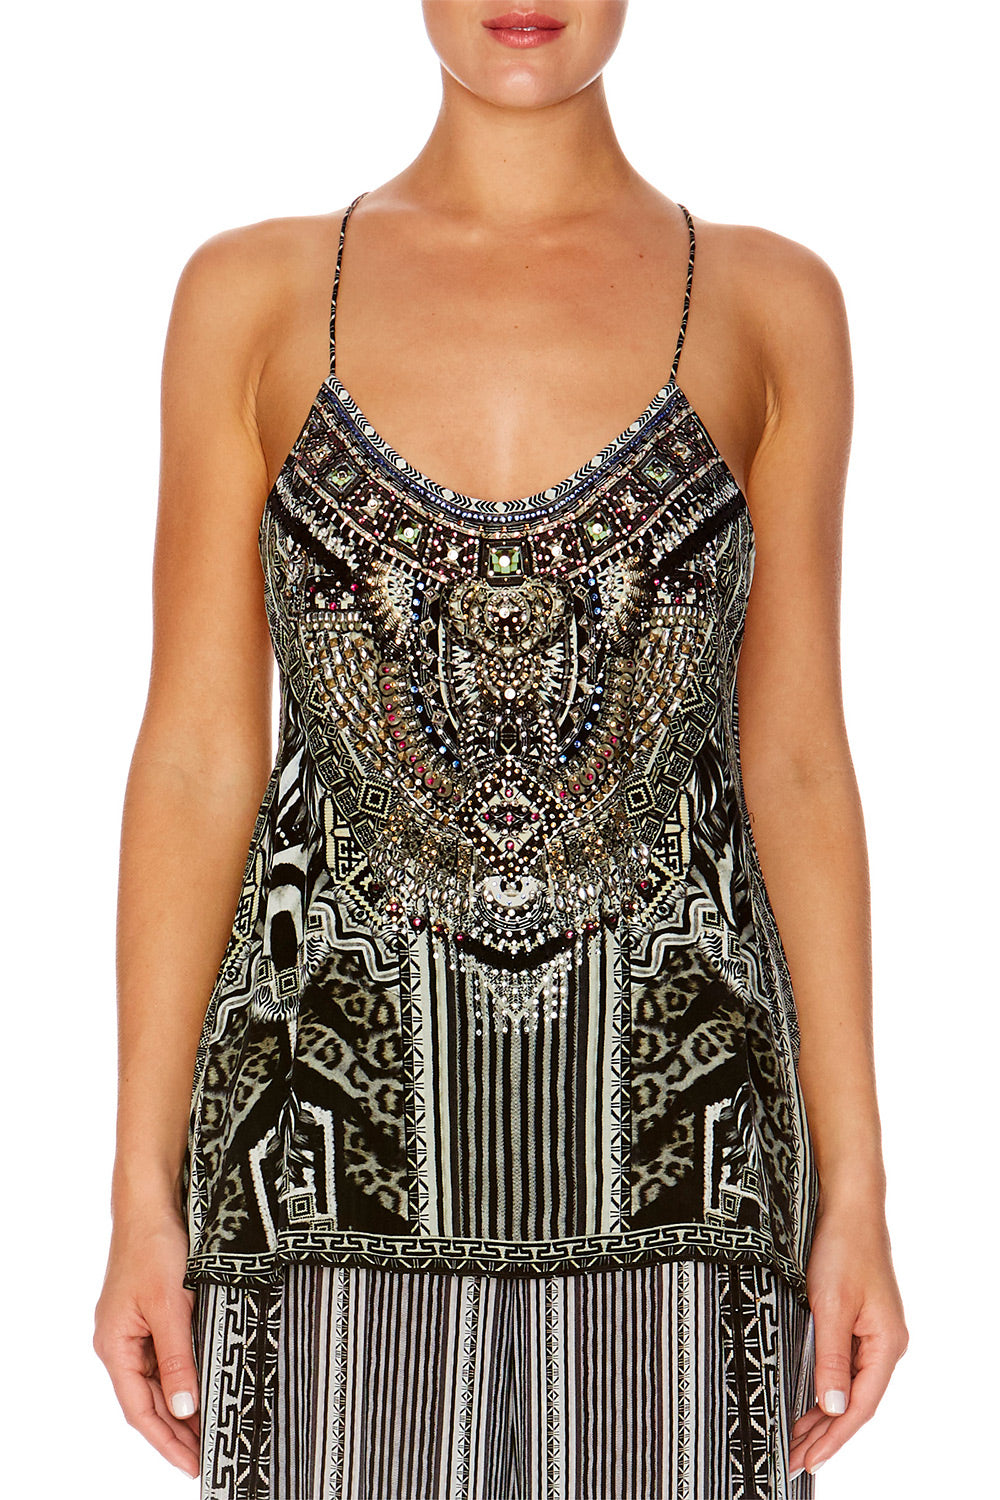 TRIBAL THEORY T BACK SHOESTRING TOP